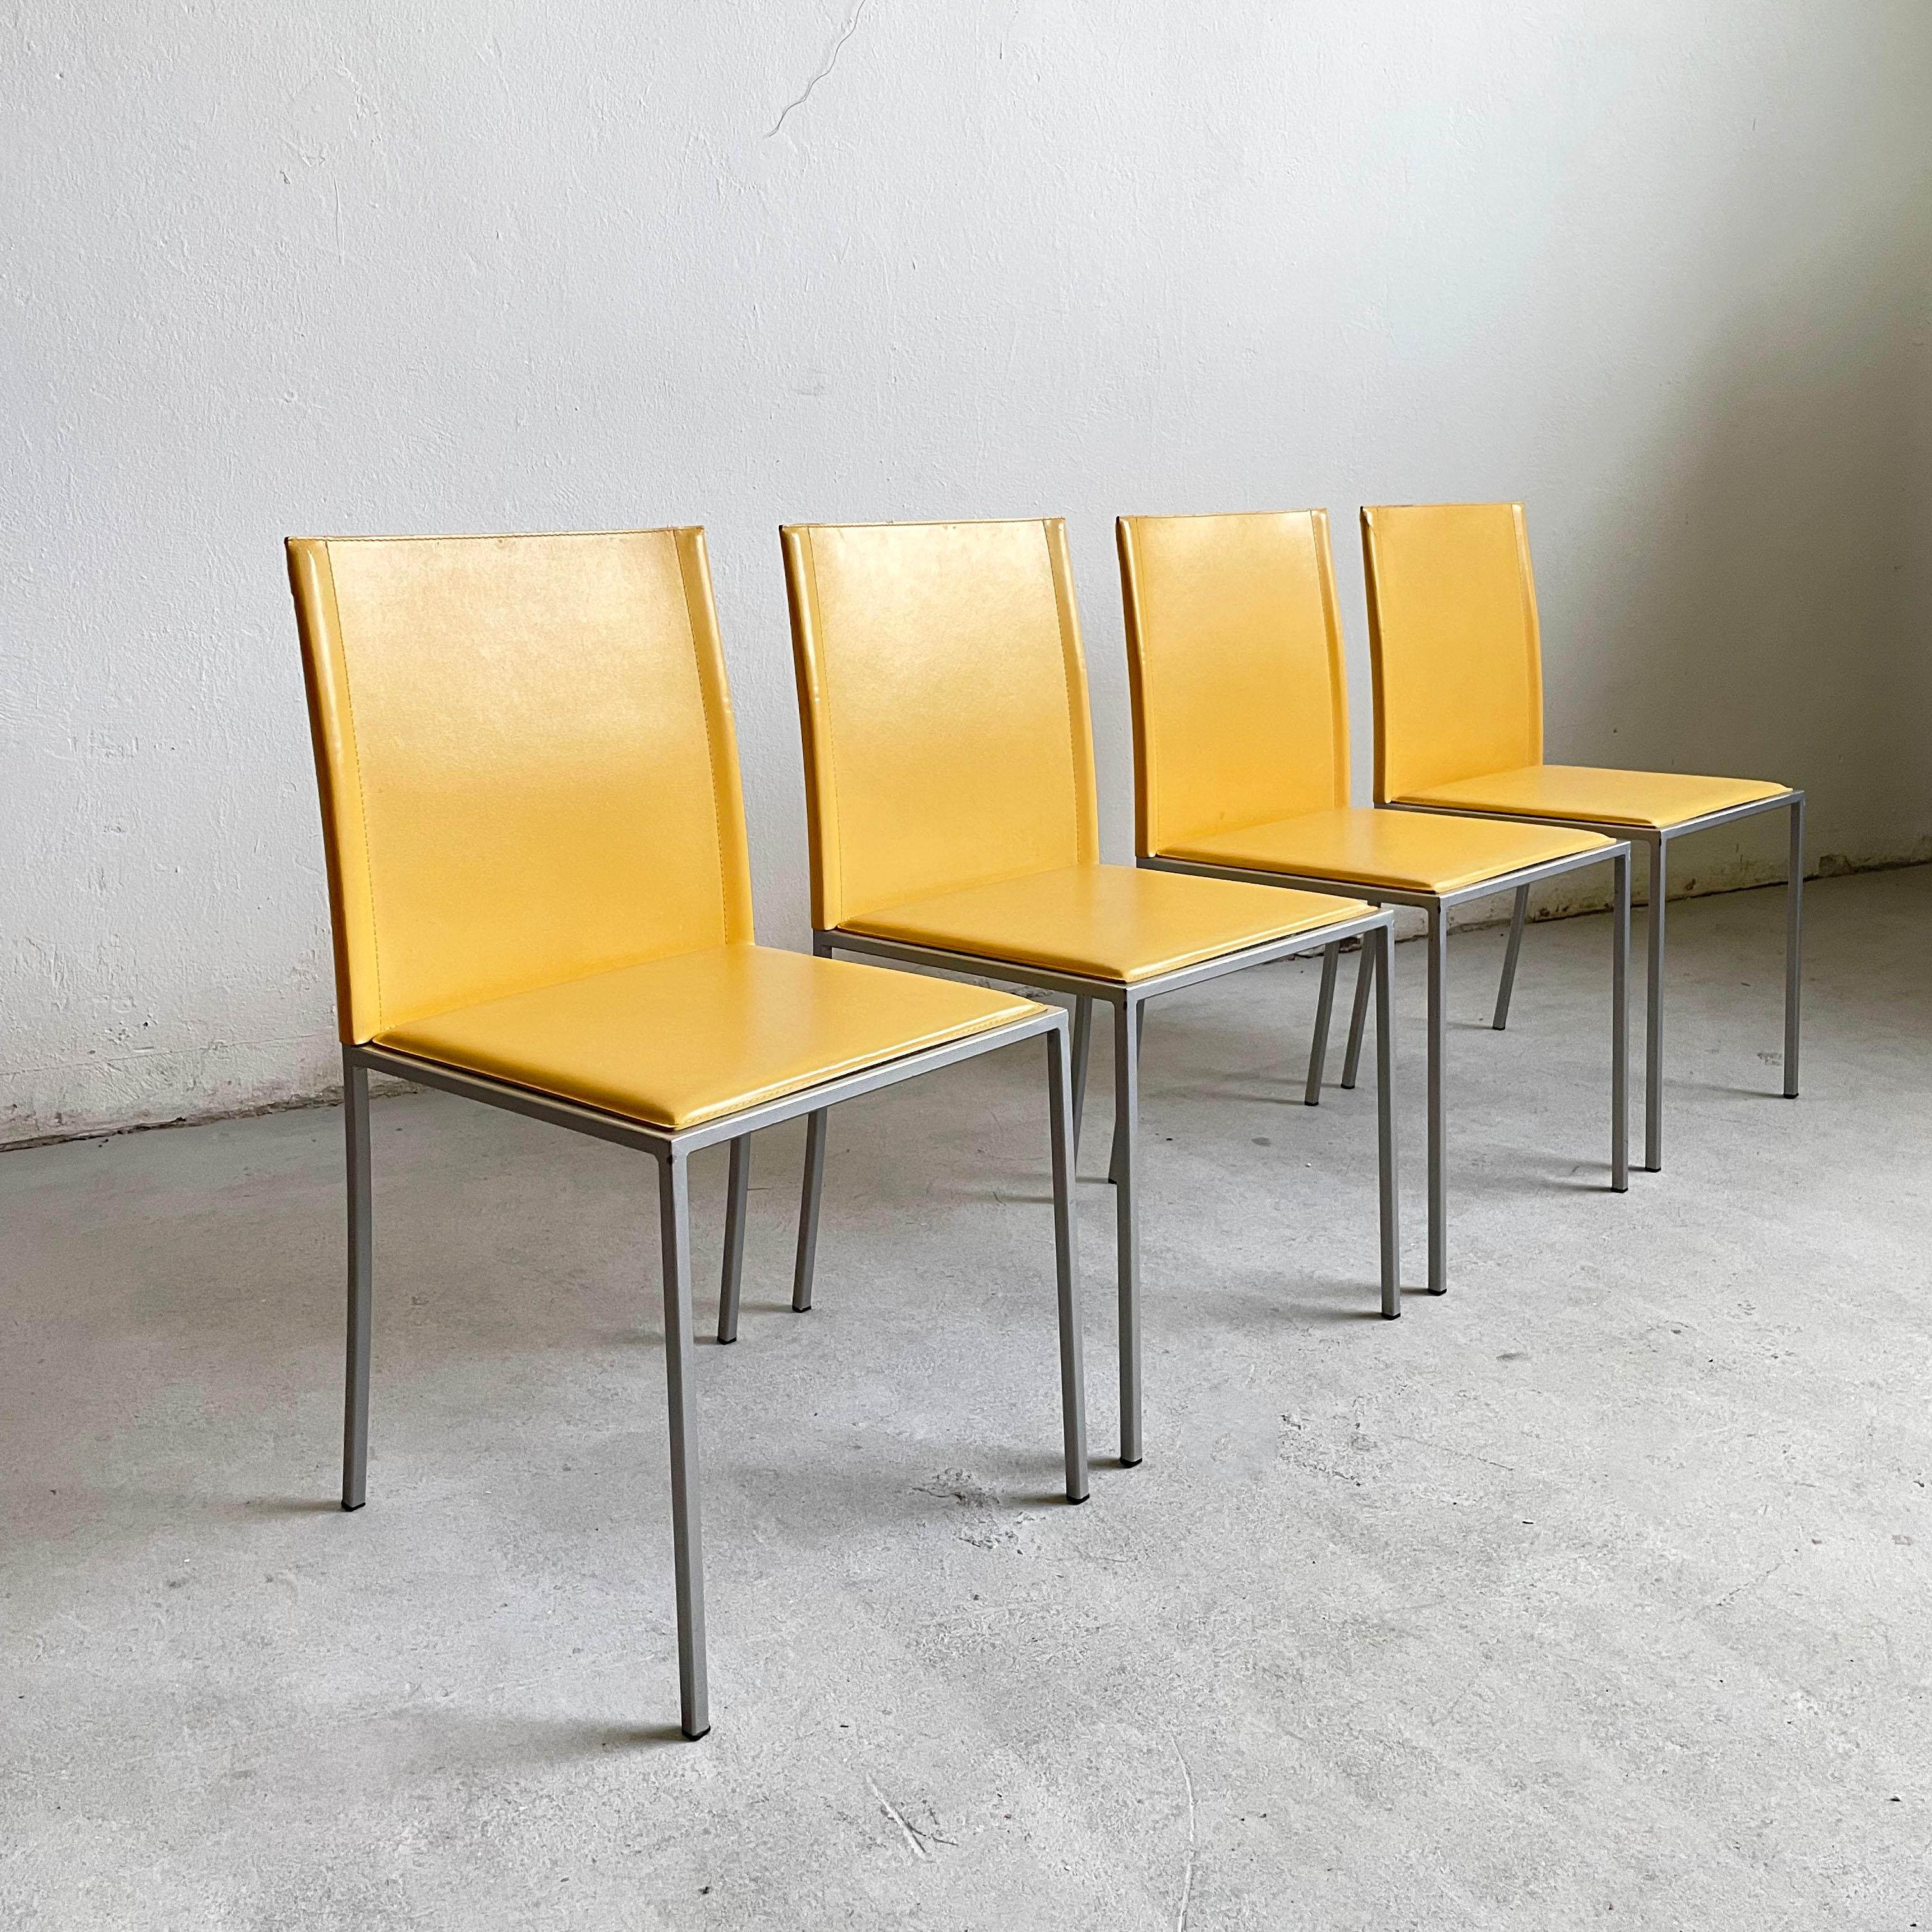 20th Century Set of 4 Italian Minimalist Modernist Leather Chairs by Calligaris, Italy 1990s For Sale